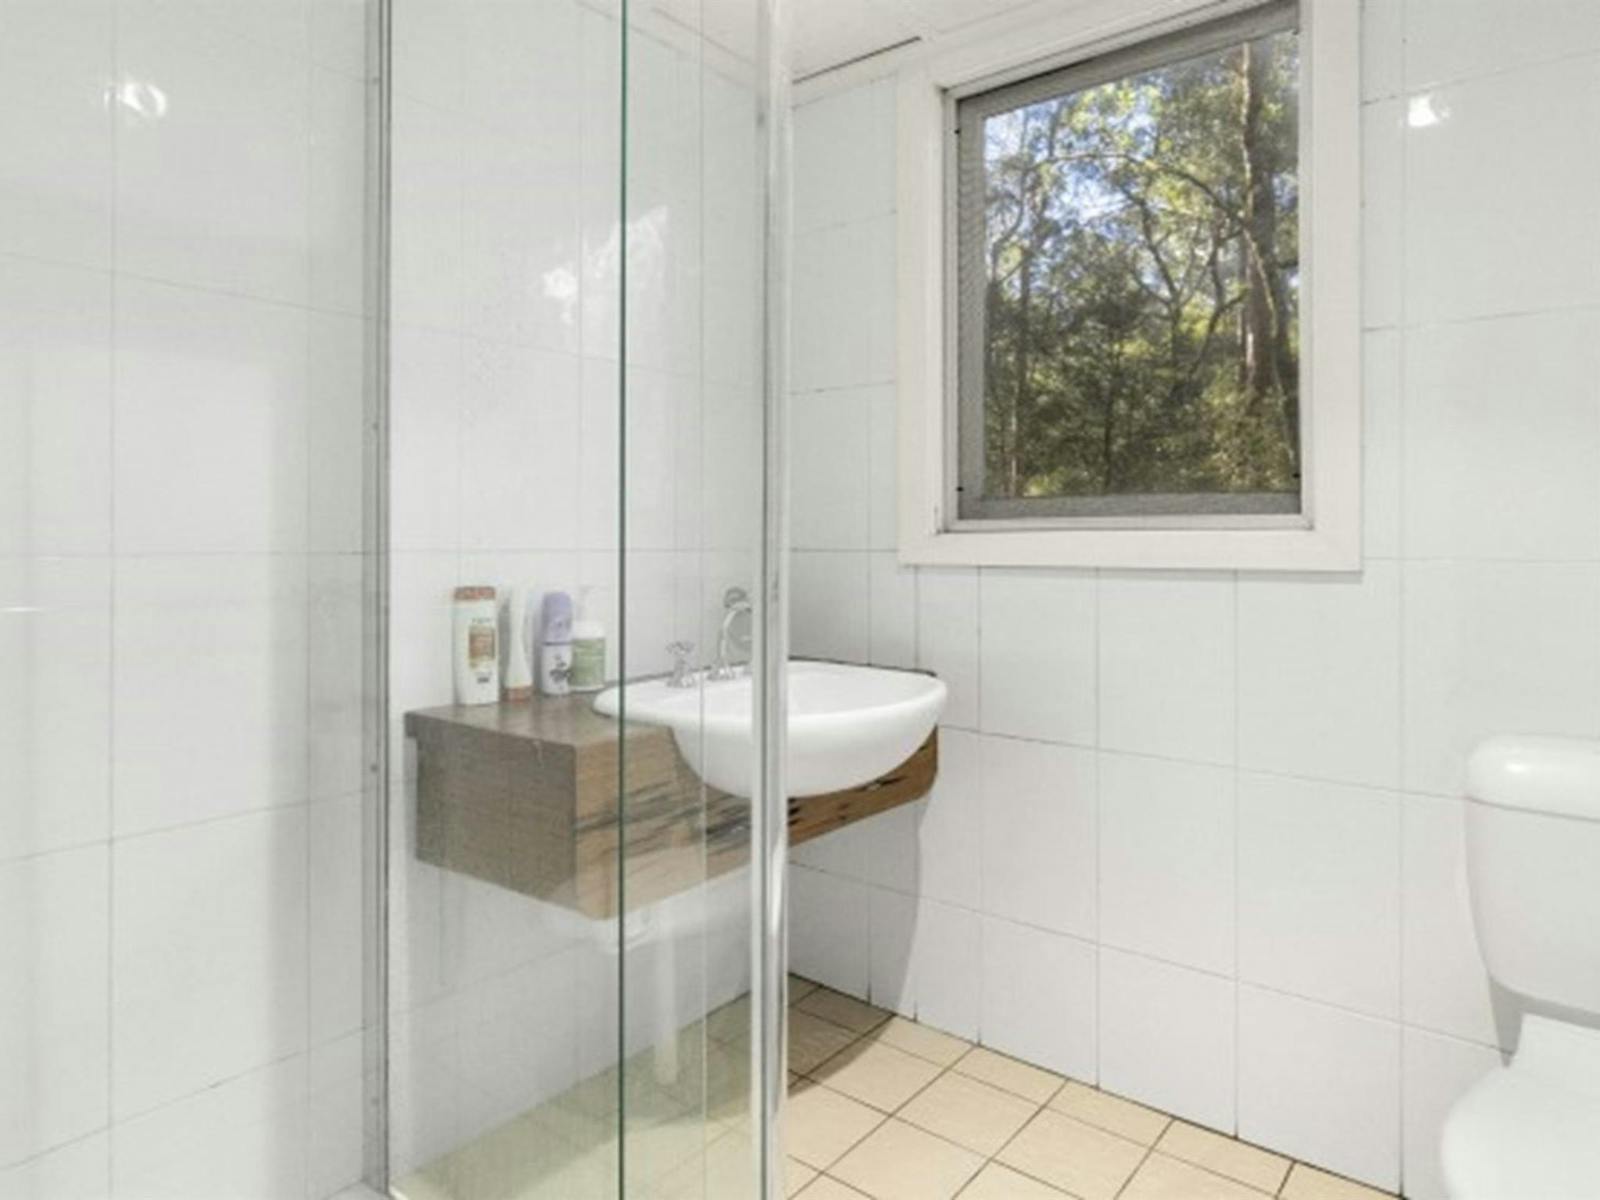 The bathroom in Toms Cabin, New England National Park. Photo:  Mitchell Franzi © DPIE